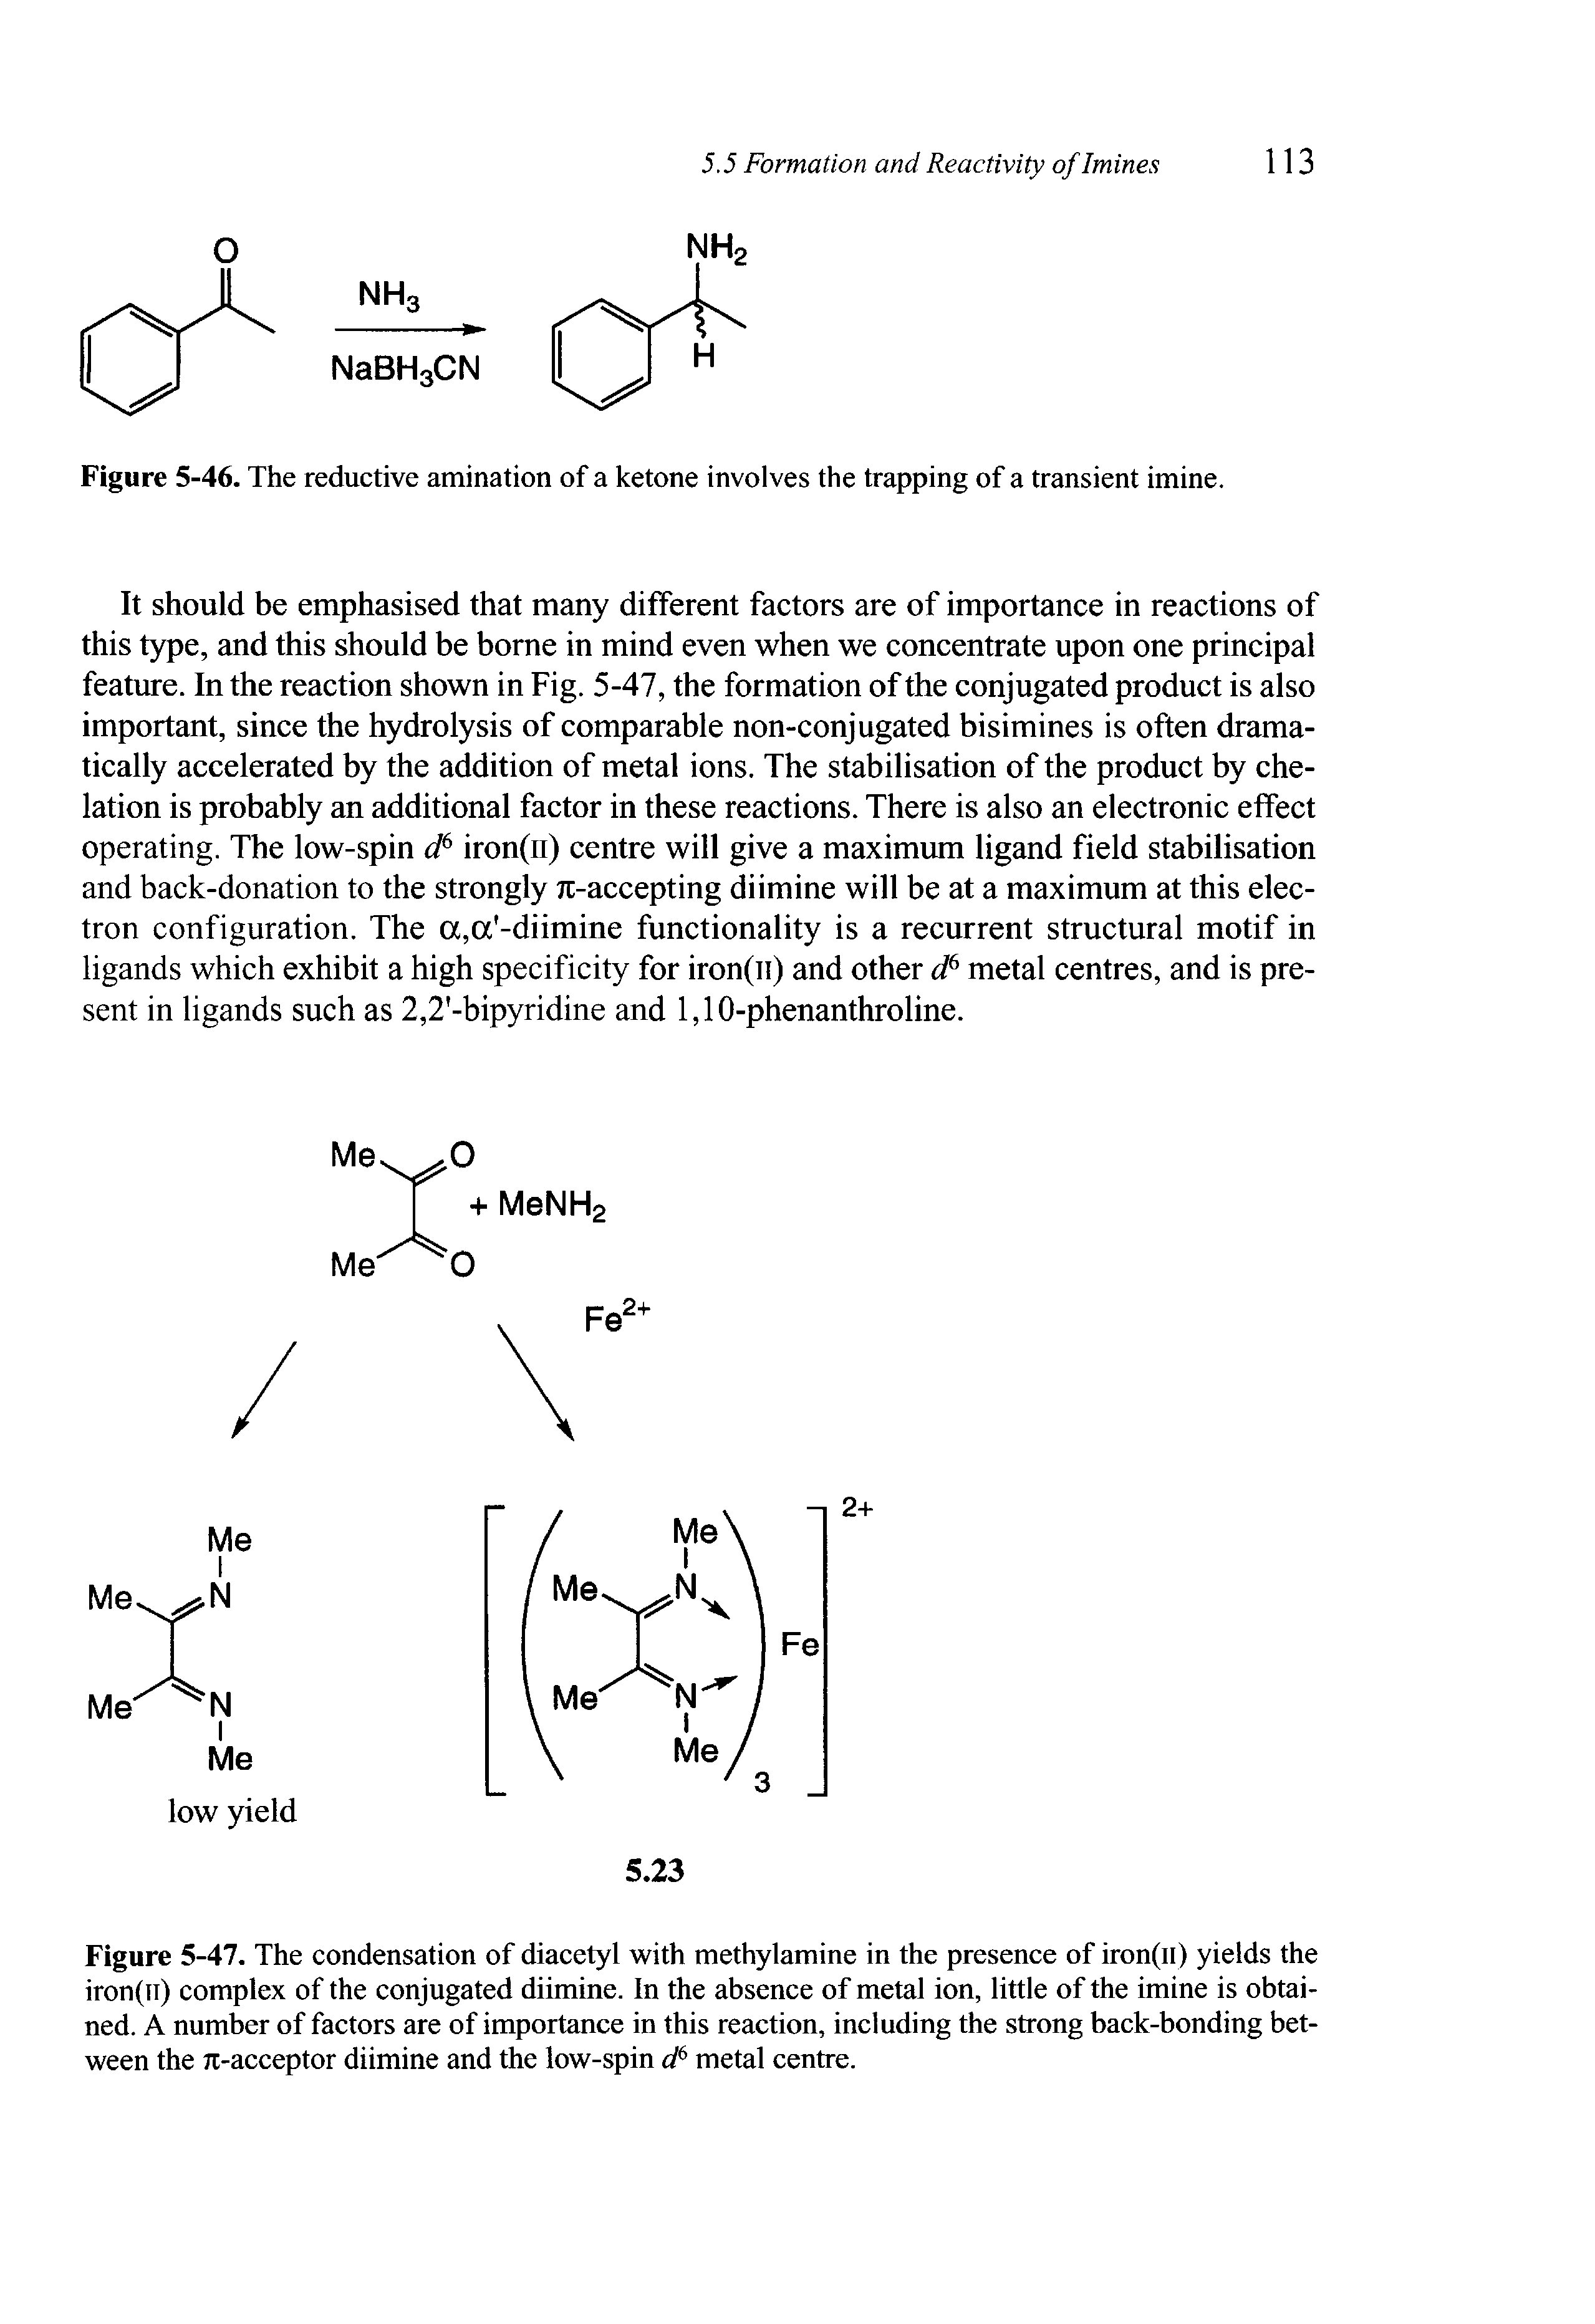 Figure 5-47. The condensation of diacetyl with methylamine in the presence of iron(n) yields the iron(n) complex of the conjugated diimine. In the absence of metal ion, little of the imine is obtained. A number of factors are of importance in this reaction, including the strong back-bonding between the 7t-acceptor diimine and the low-spin d6 metal centre.